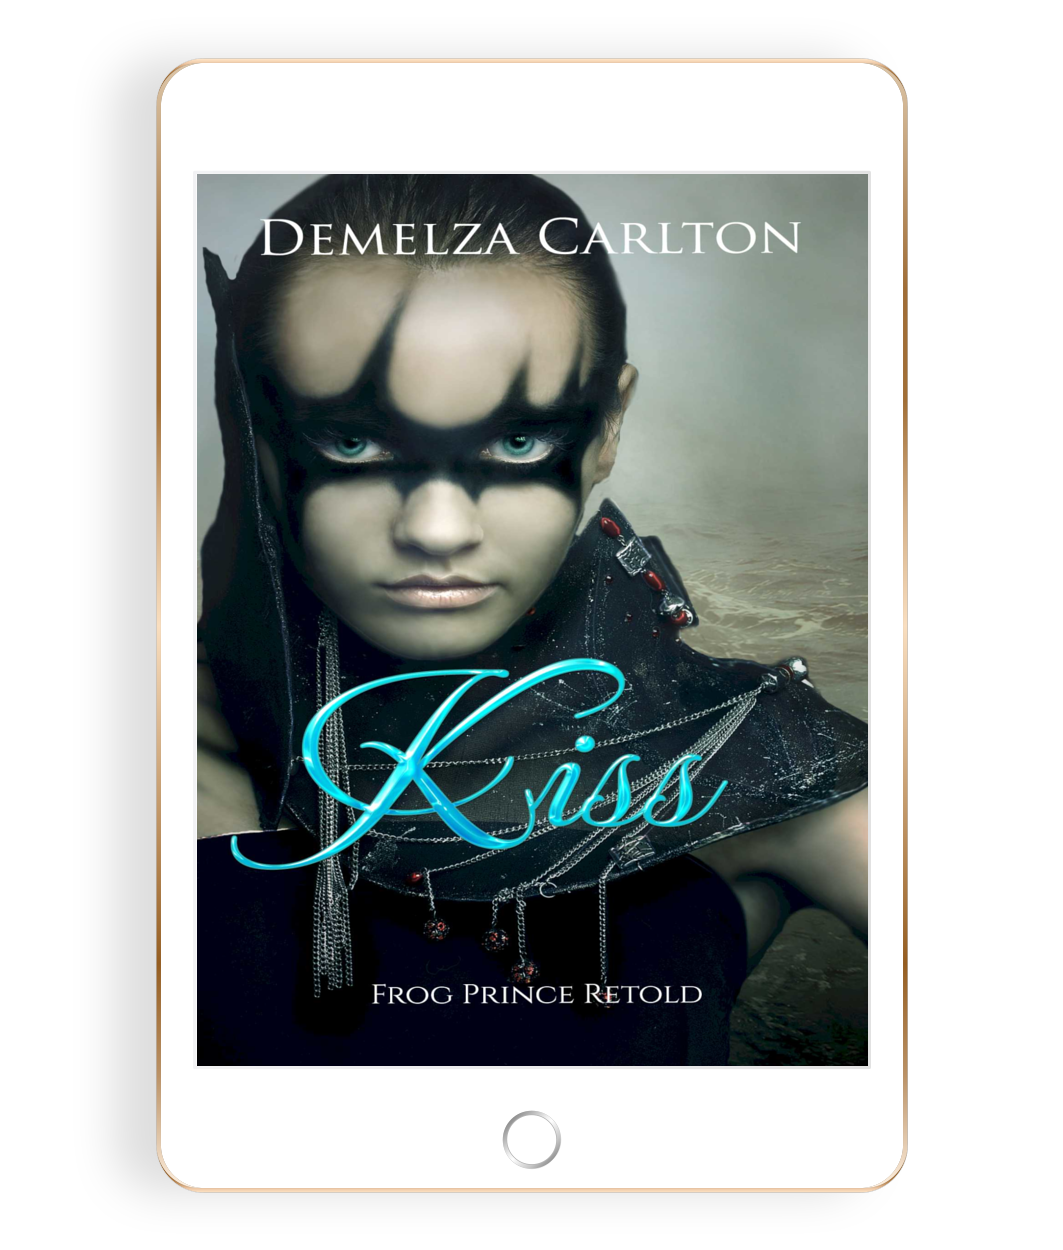 A steamy romantasy fairytale retelling of the Frog Prince for fans of Sarah J Maas, ACOTAR, Raven Kennedy, Charlaine Harris, Juliet Marillier and Rebecca Yarros